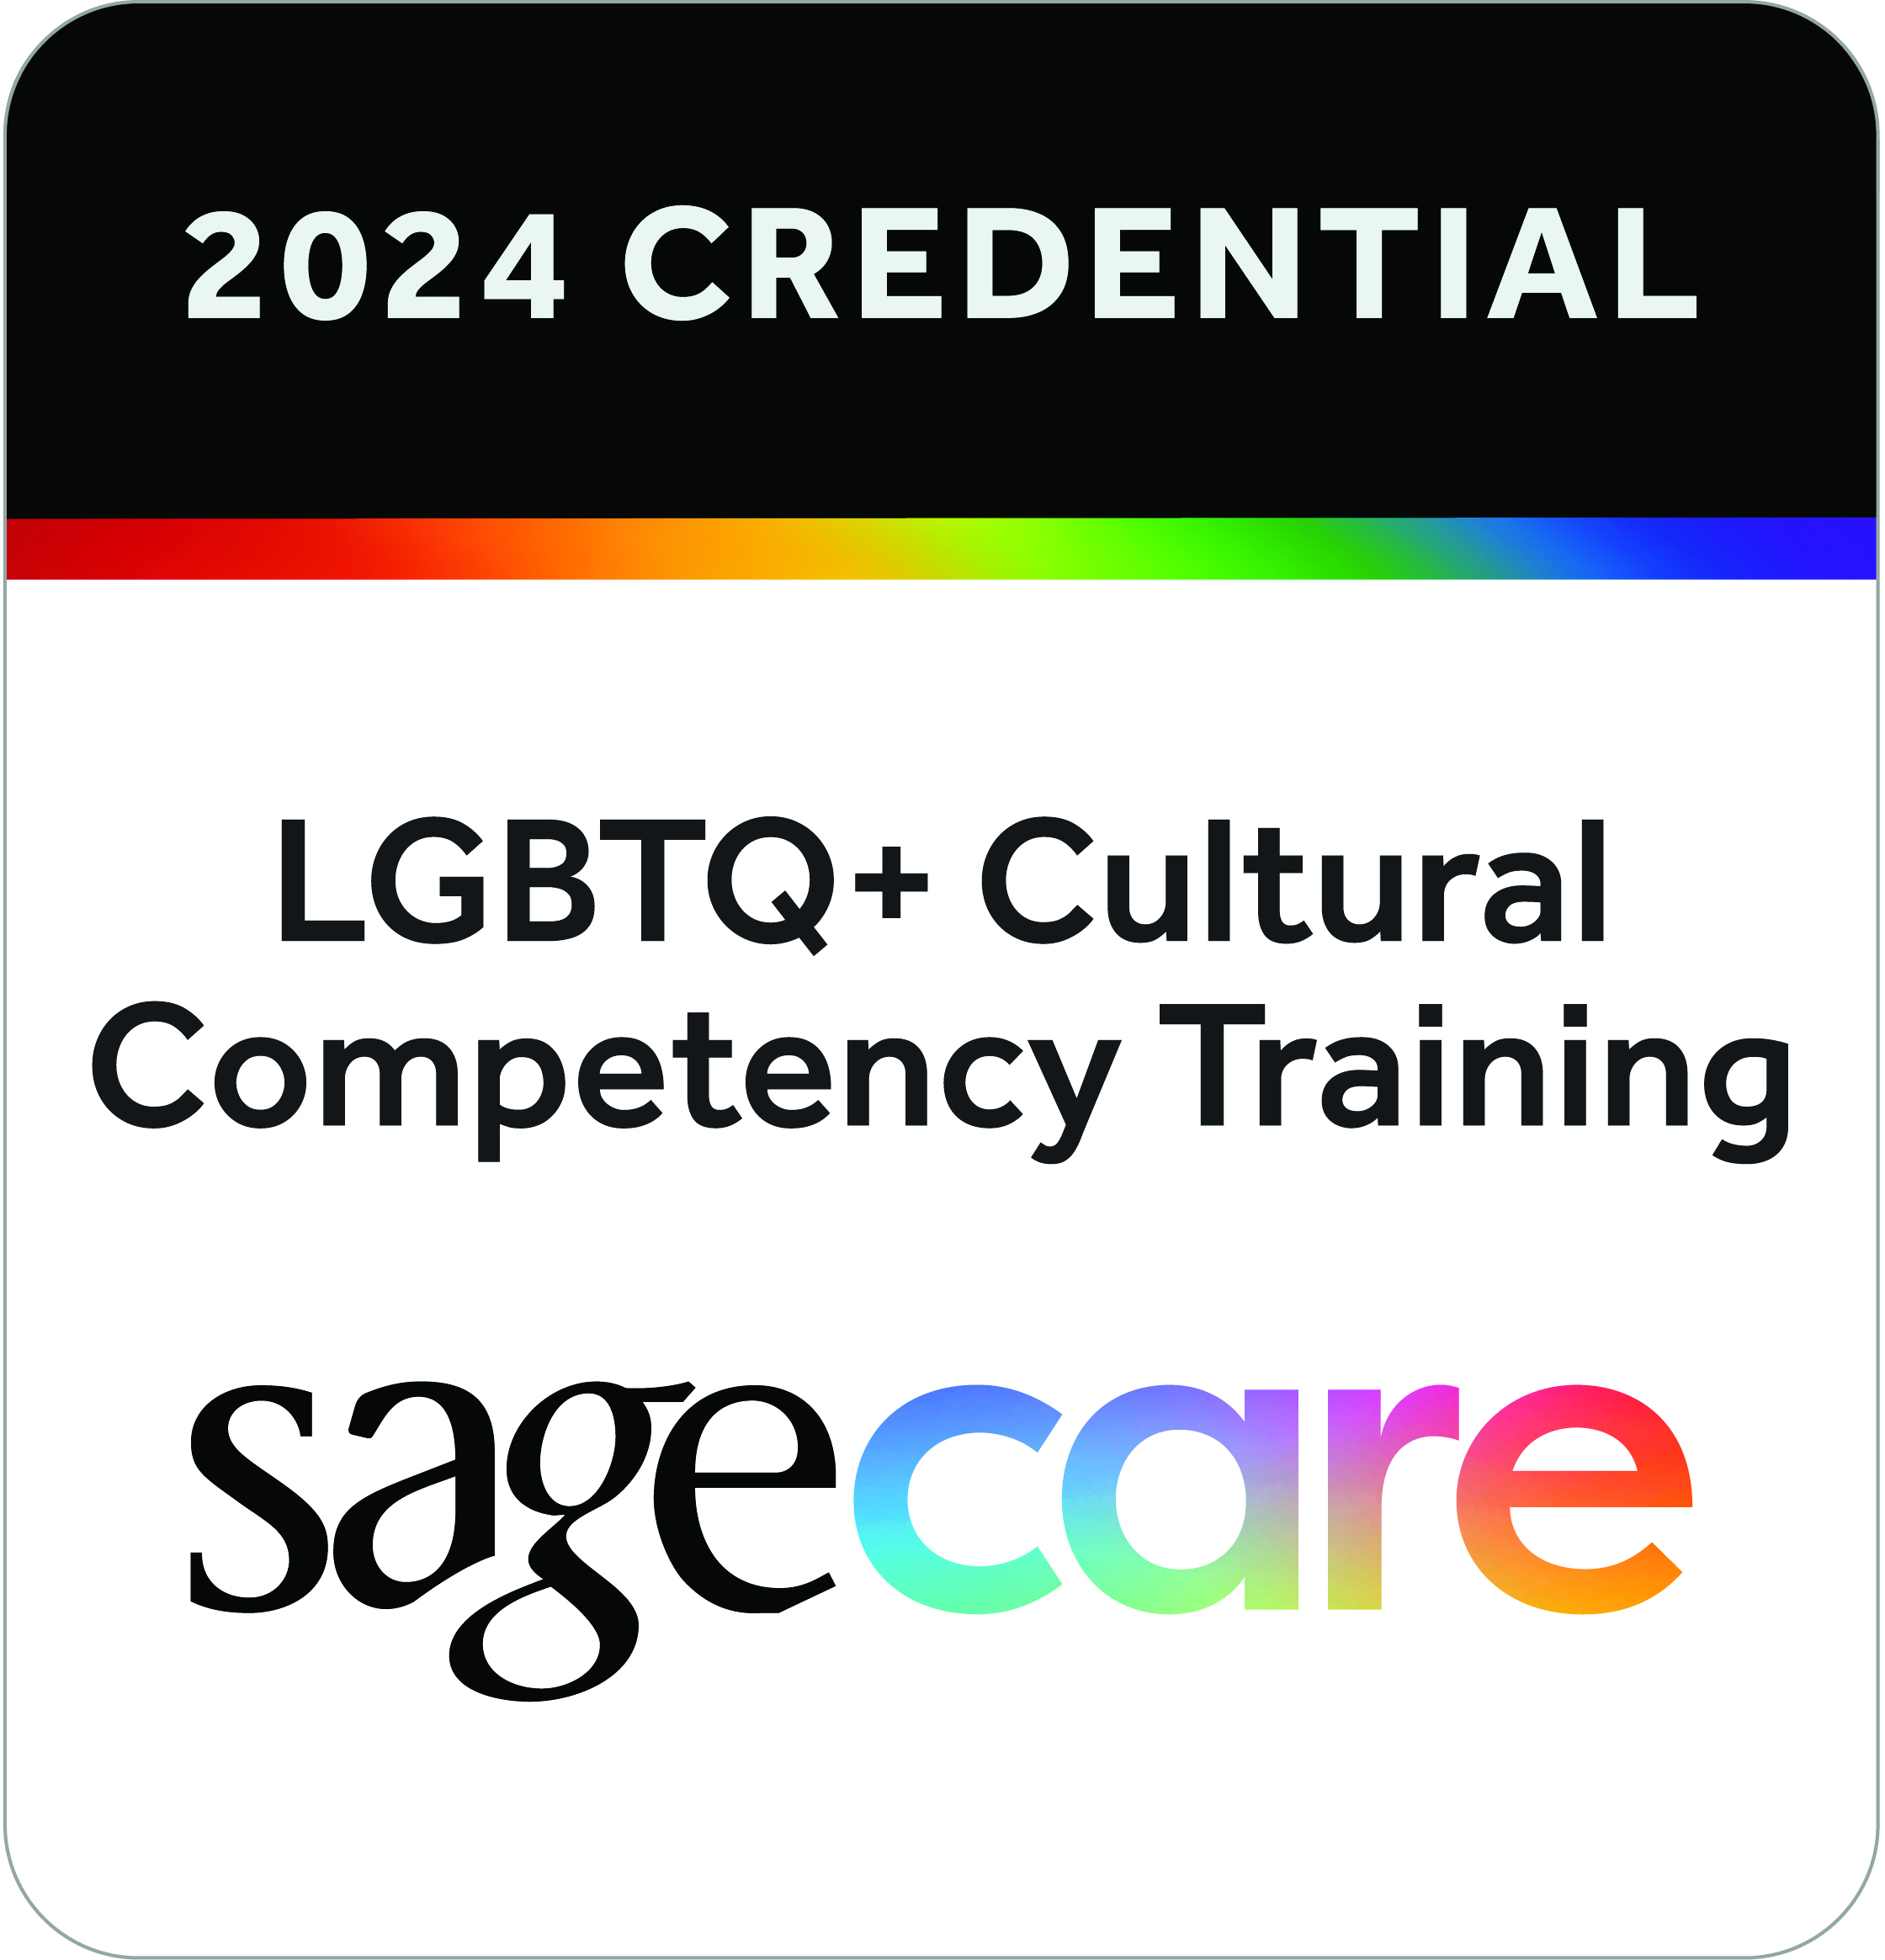 Vantage Aging Strengthens Commitment to LGBTQ+ Older Adults through Continued Partnership with SAGECare